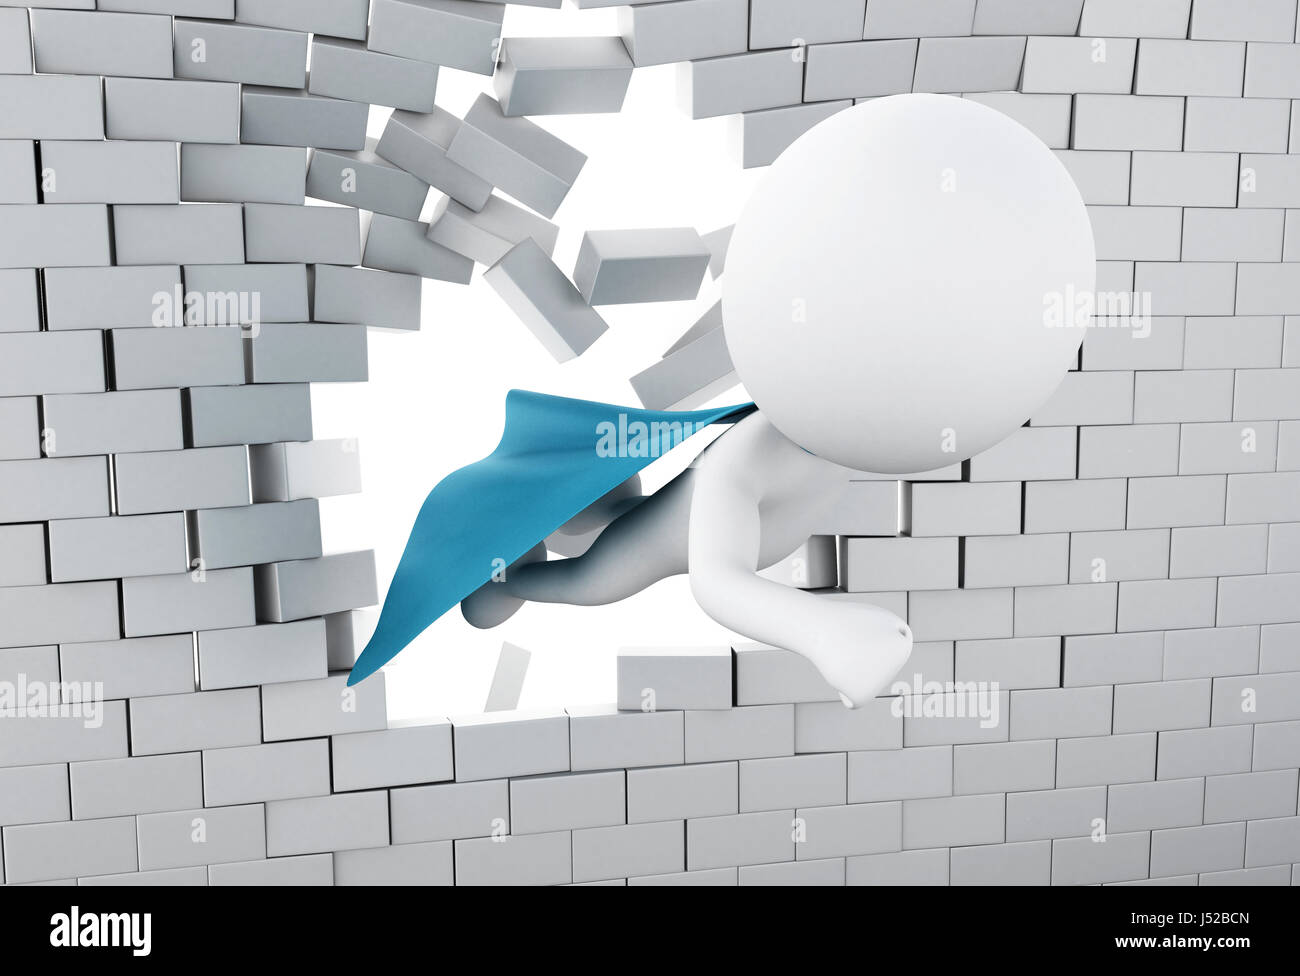 3d illustration. Super hero with blue cape flying through broken brick wall. Stock Photo